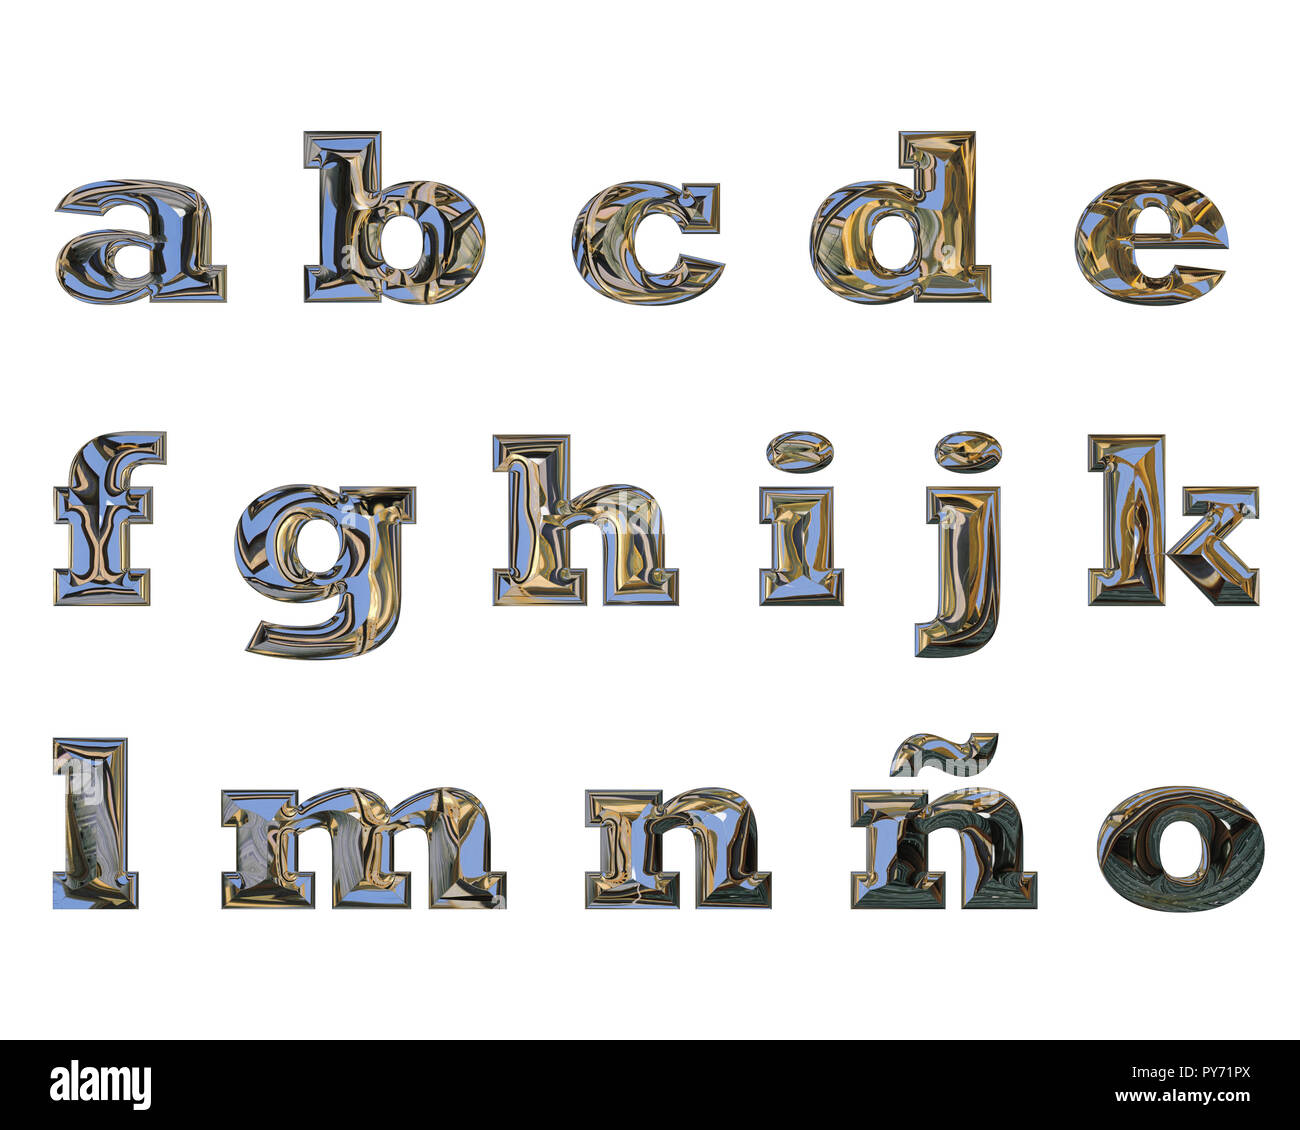 Lowercase letters from 'a' to 'o', made with liquid chrome effect Stock Photo